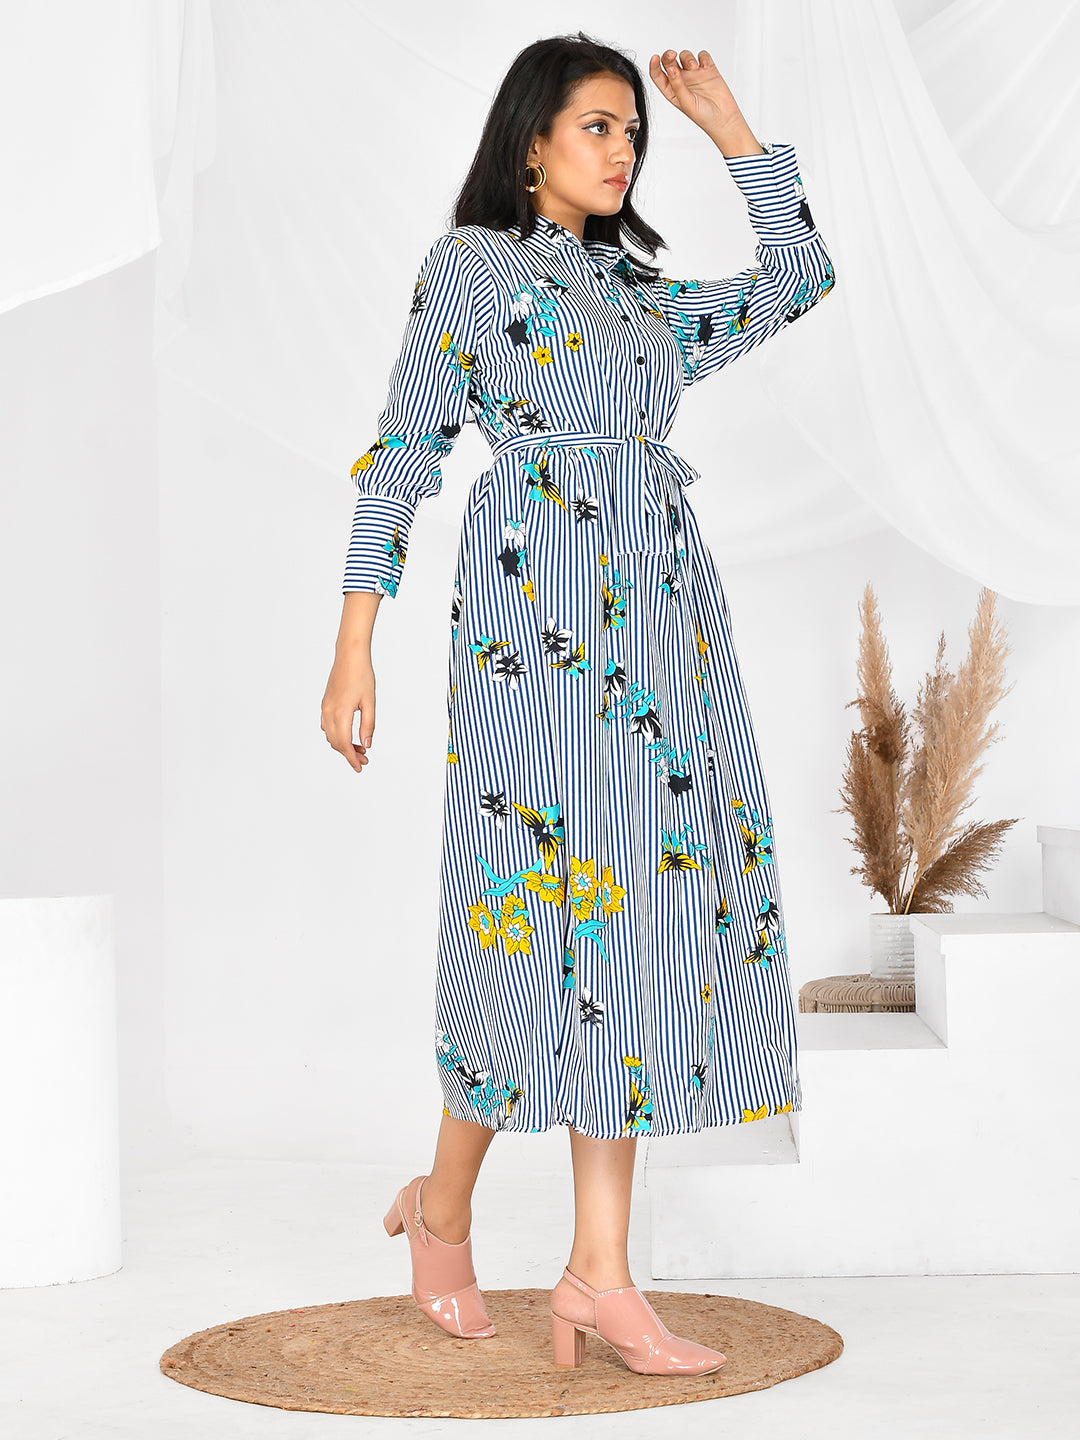 Get ready to slay in this grey printed party wear western dress for girls and women. With its stylish design and comfortable fit, you'll be the center of attention at any event. Perfect for any season, this dress is a must-have for your wardrobe. Don't miss out on this fashion-forward piece.